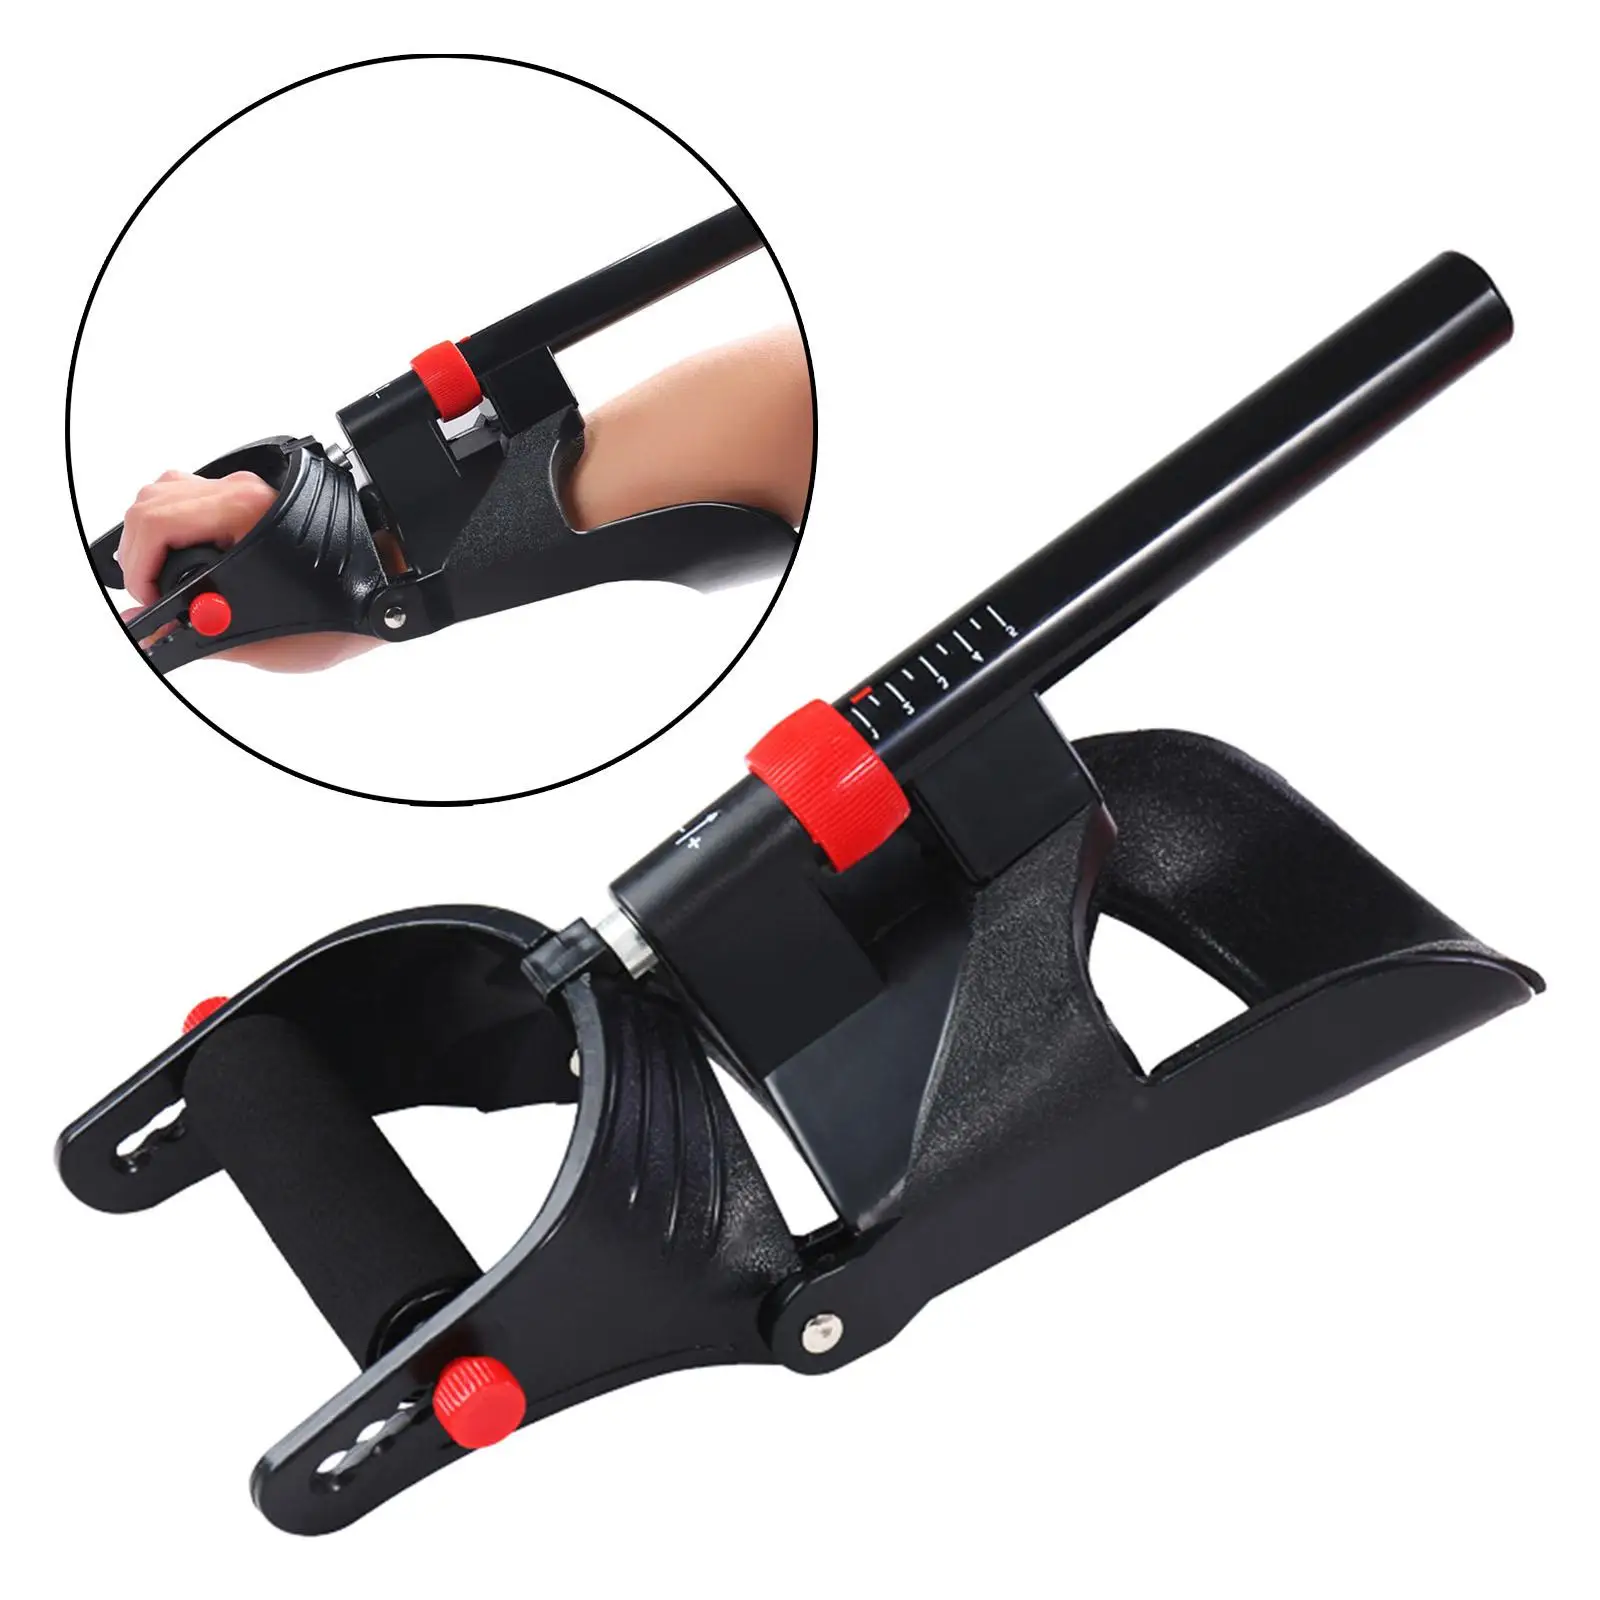 Wrist Strengthener Work Out Supplies Strength Trainer Arm Exercise Forearm Strengthener for Men Athletes Muscle Building